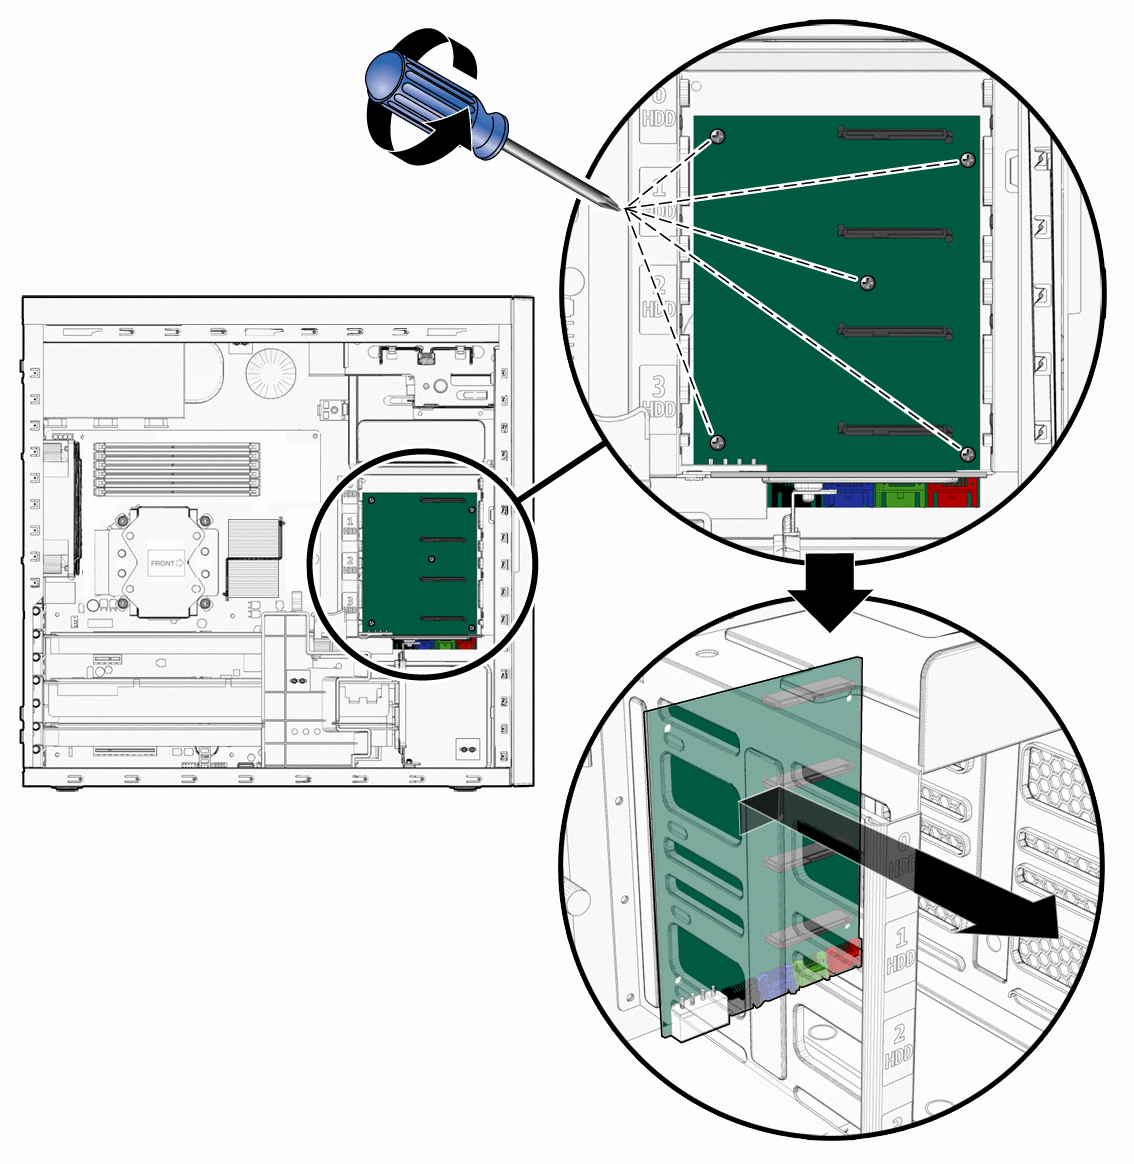 Figure showing removal of storage cables and backplane
from the workstation.